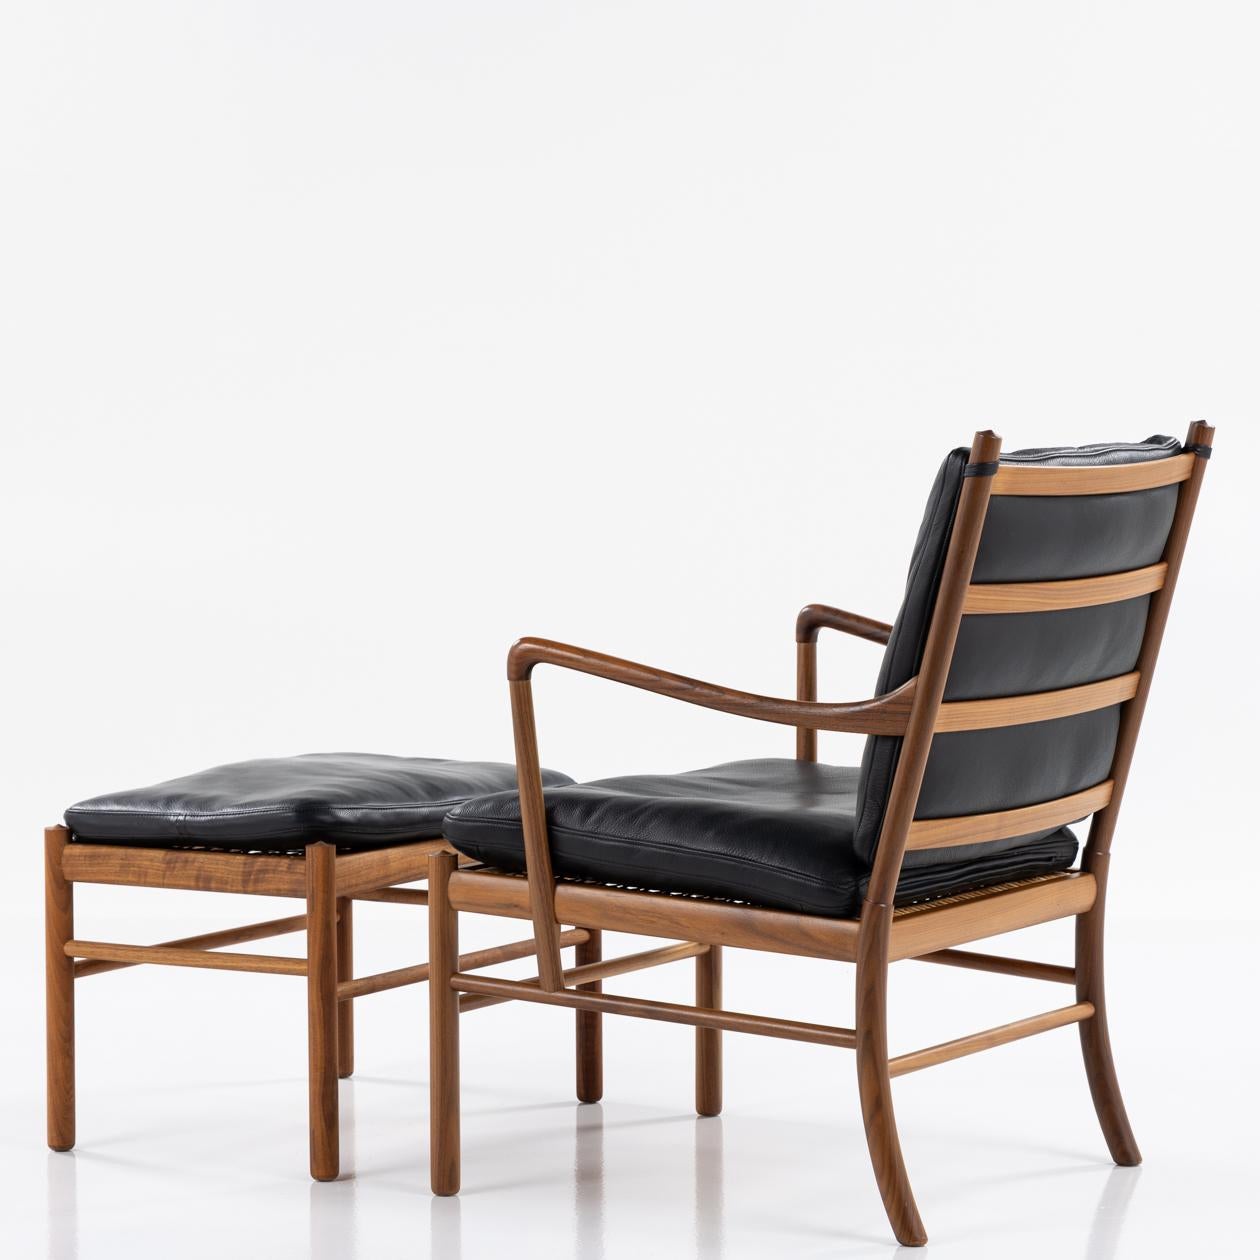 PJ 149 - 'Colonial Chair' in walnut and black leather with matching stool. By Ole Wanscher / P. J Furniture